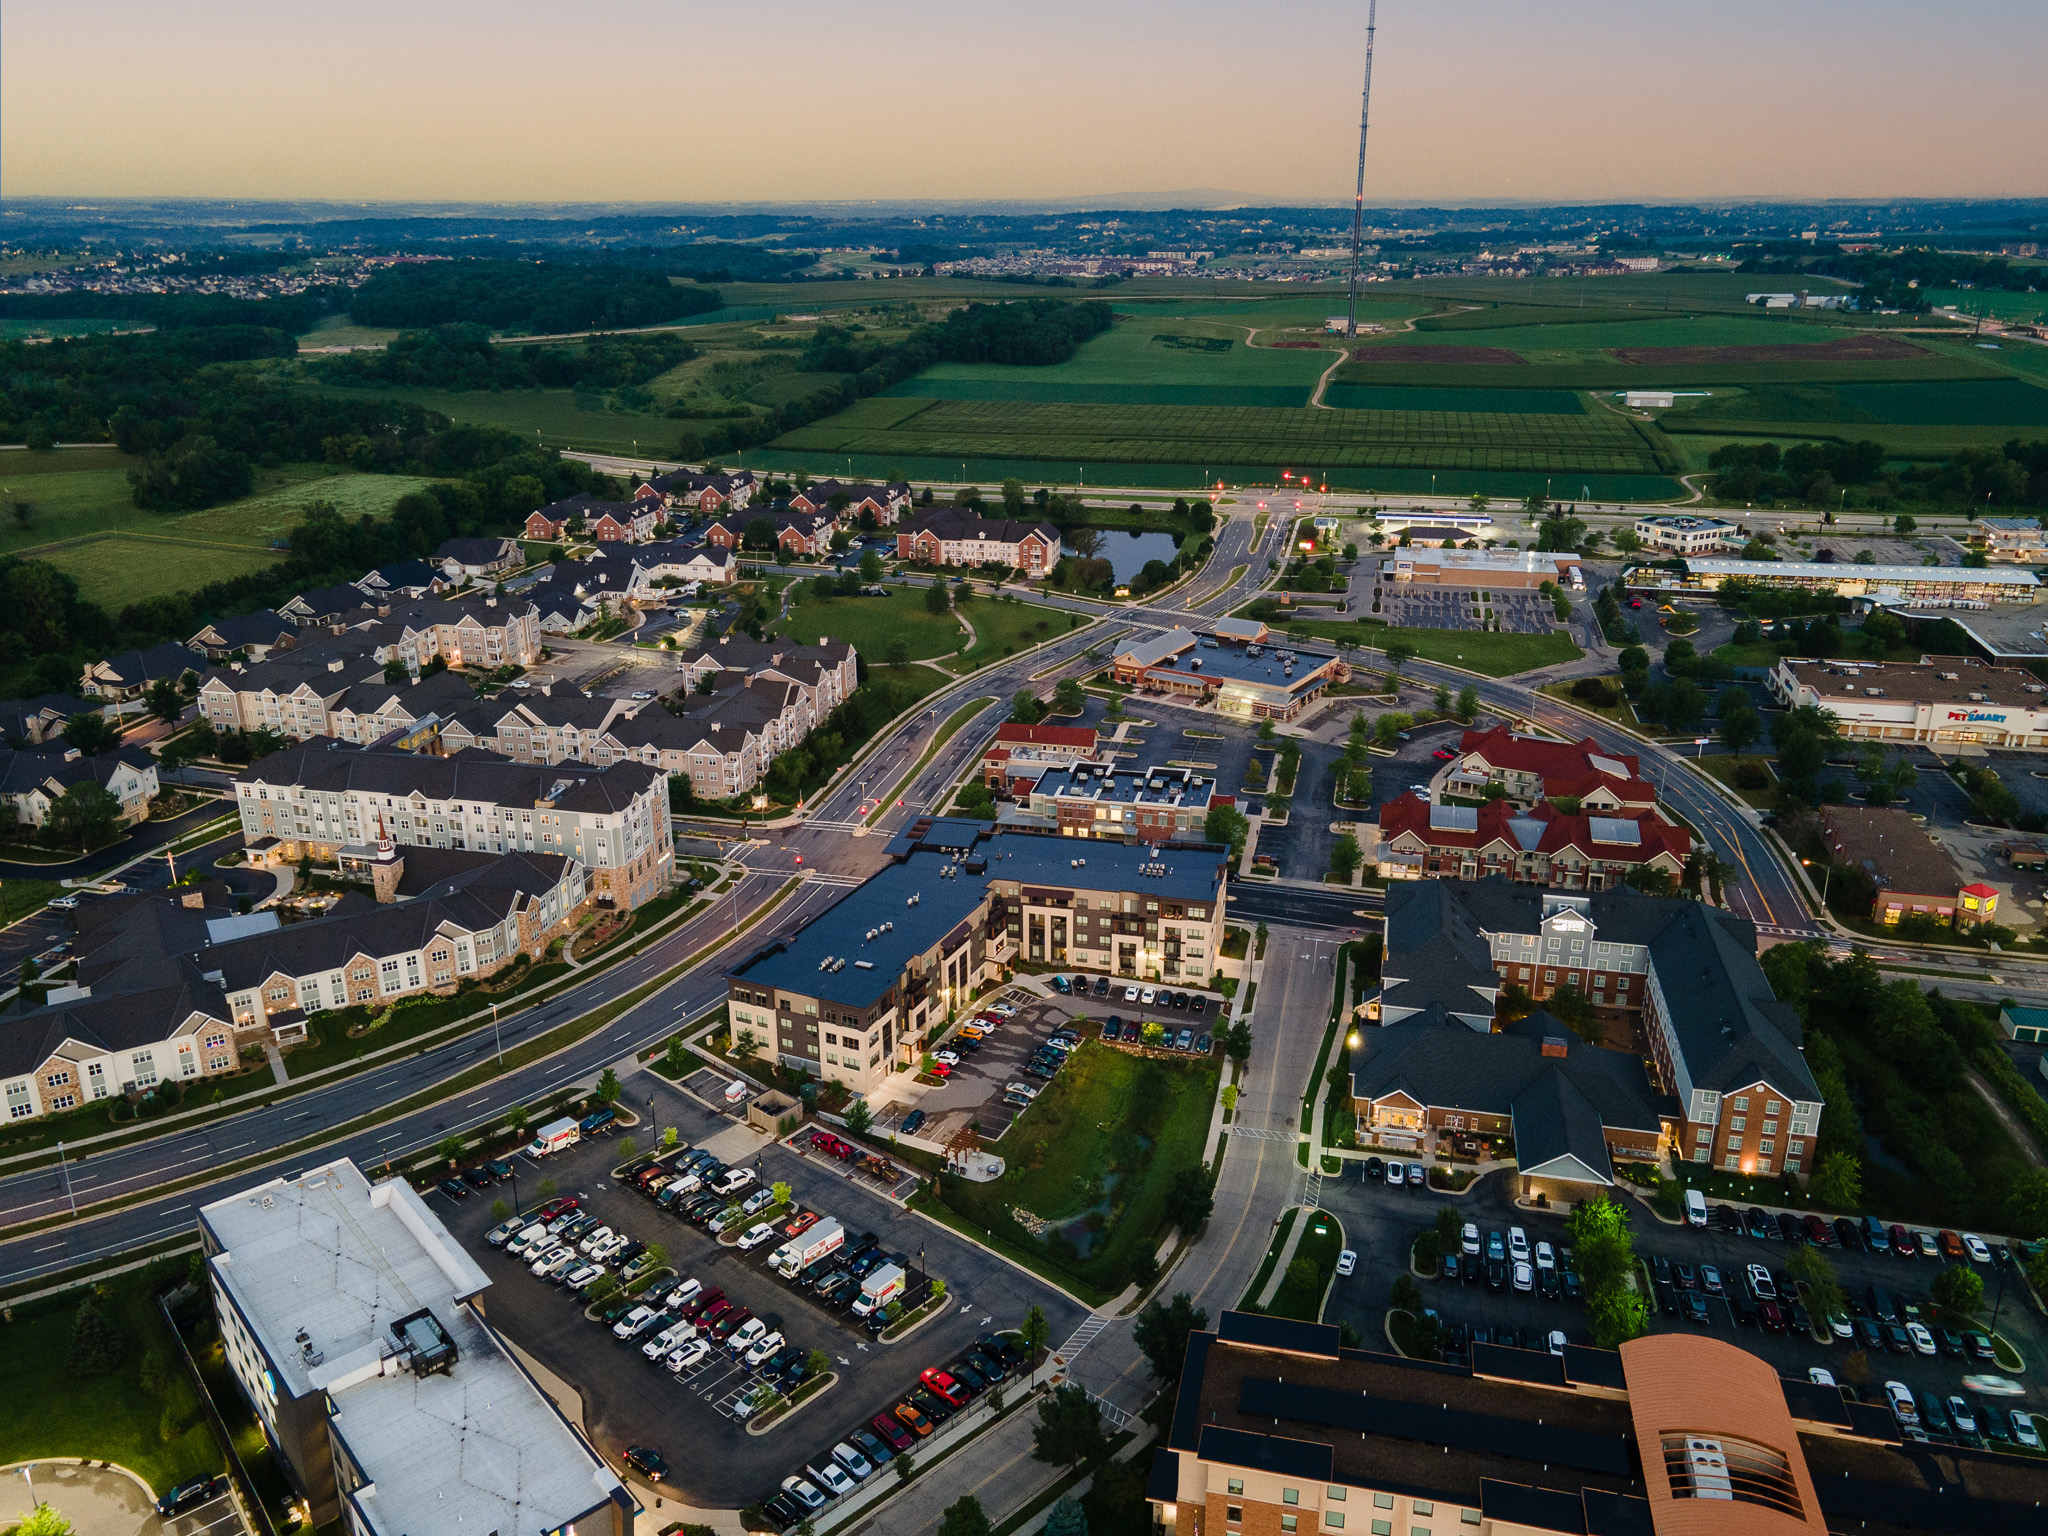 Aerial shot of apartment complexes and farm land at dusk